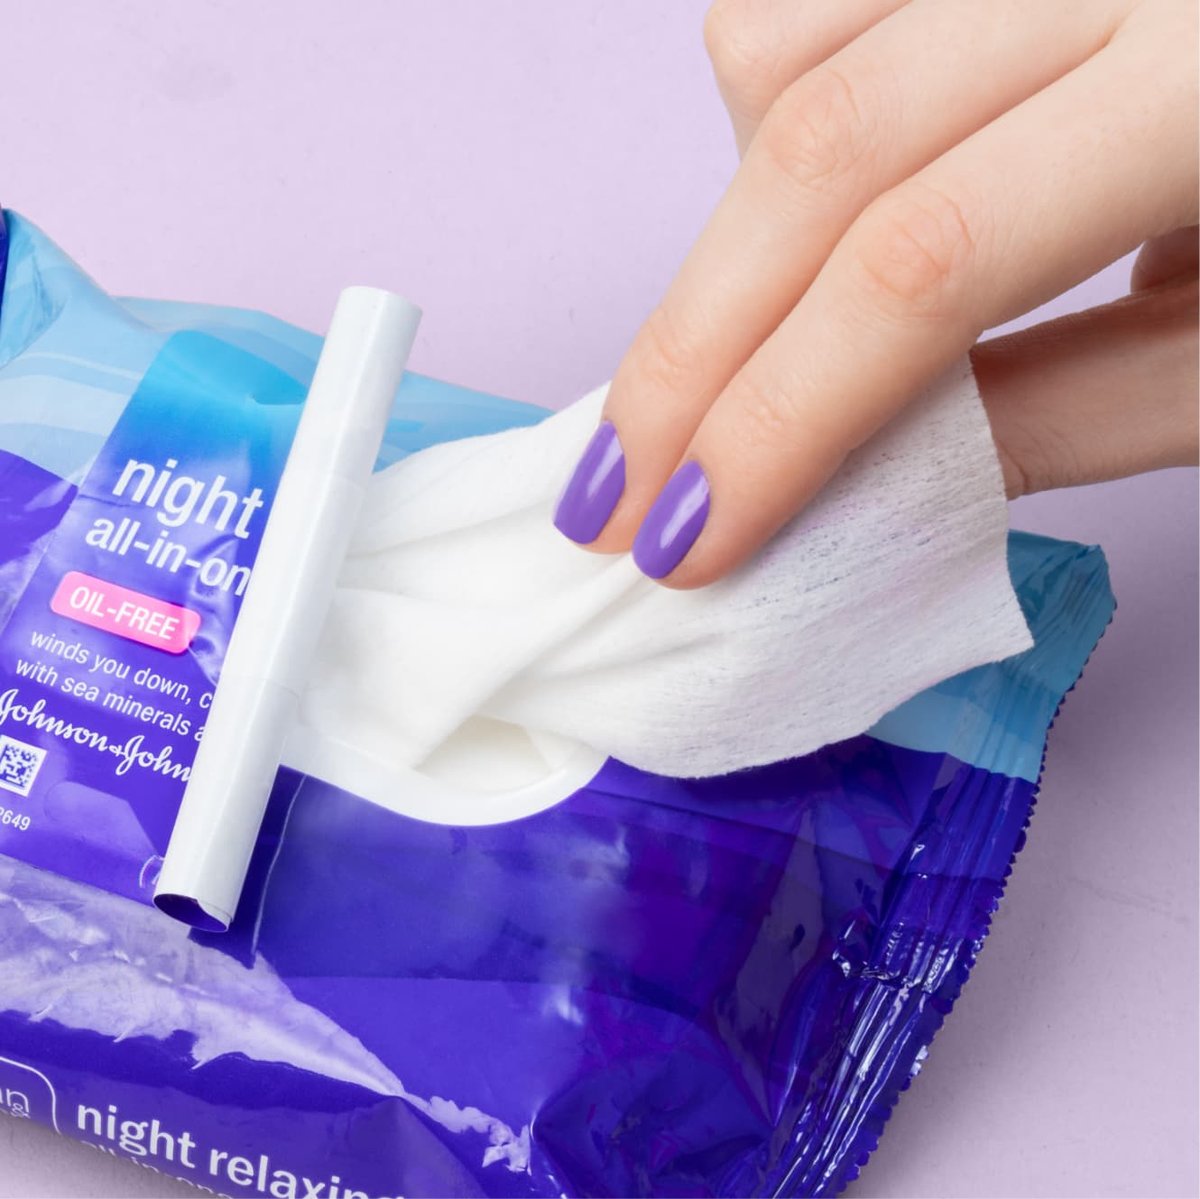 Hand with purple nails pulls Night Relaxing cleansing wipe out of dark blue reusable packaging in front of light purple background